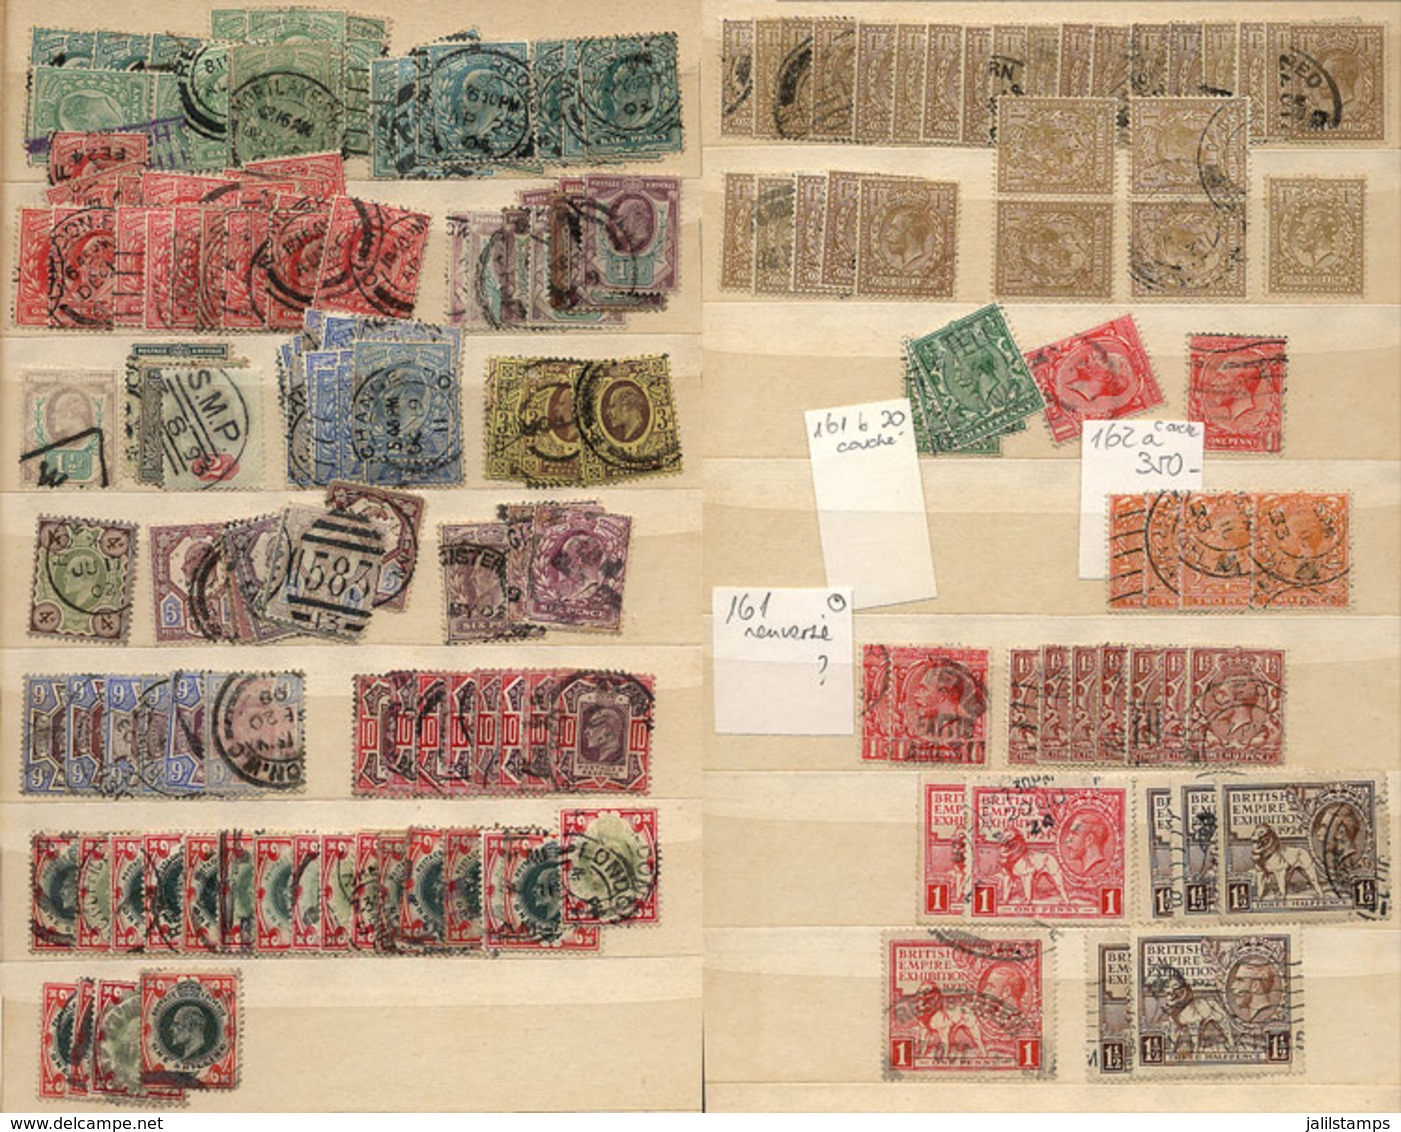 787 GREAT BRITAIN: Stockbook With Several Hundreds Stamps Of Circa 1920/50s, There Are S - Officials